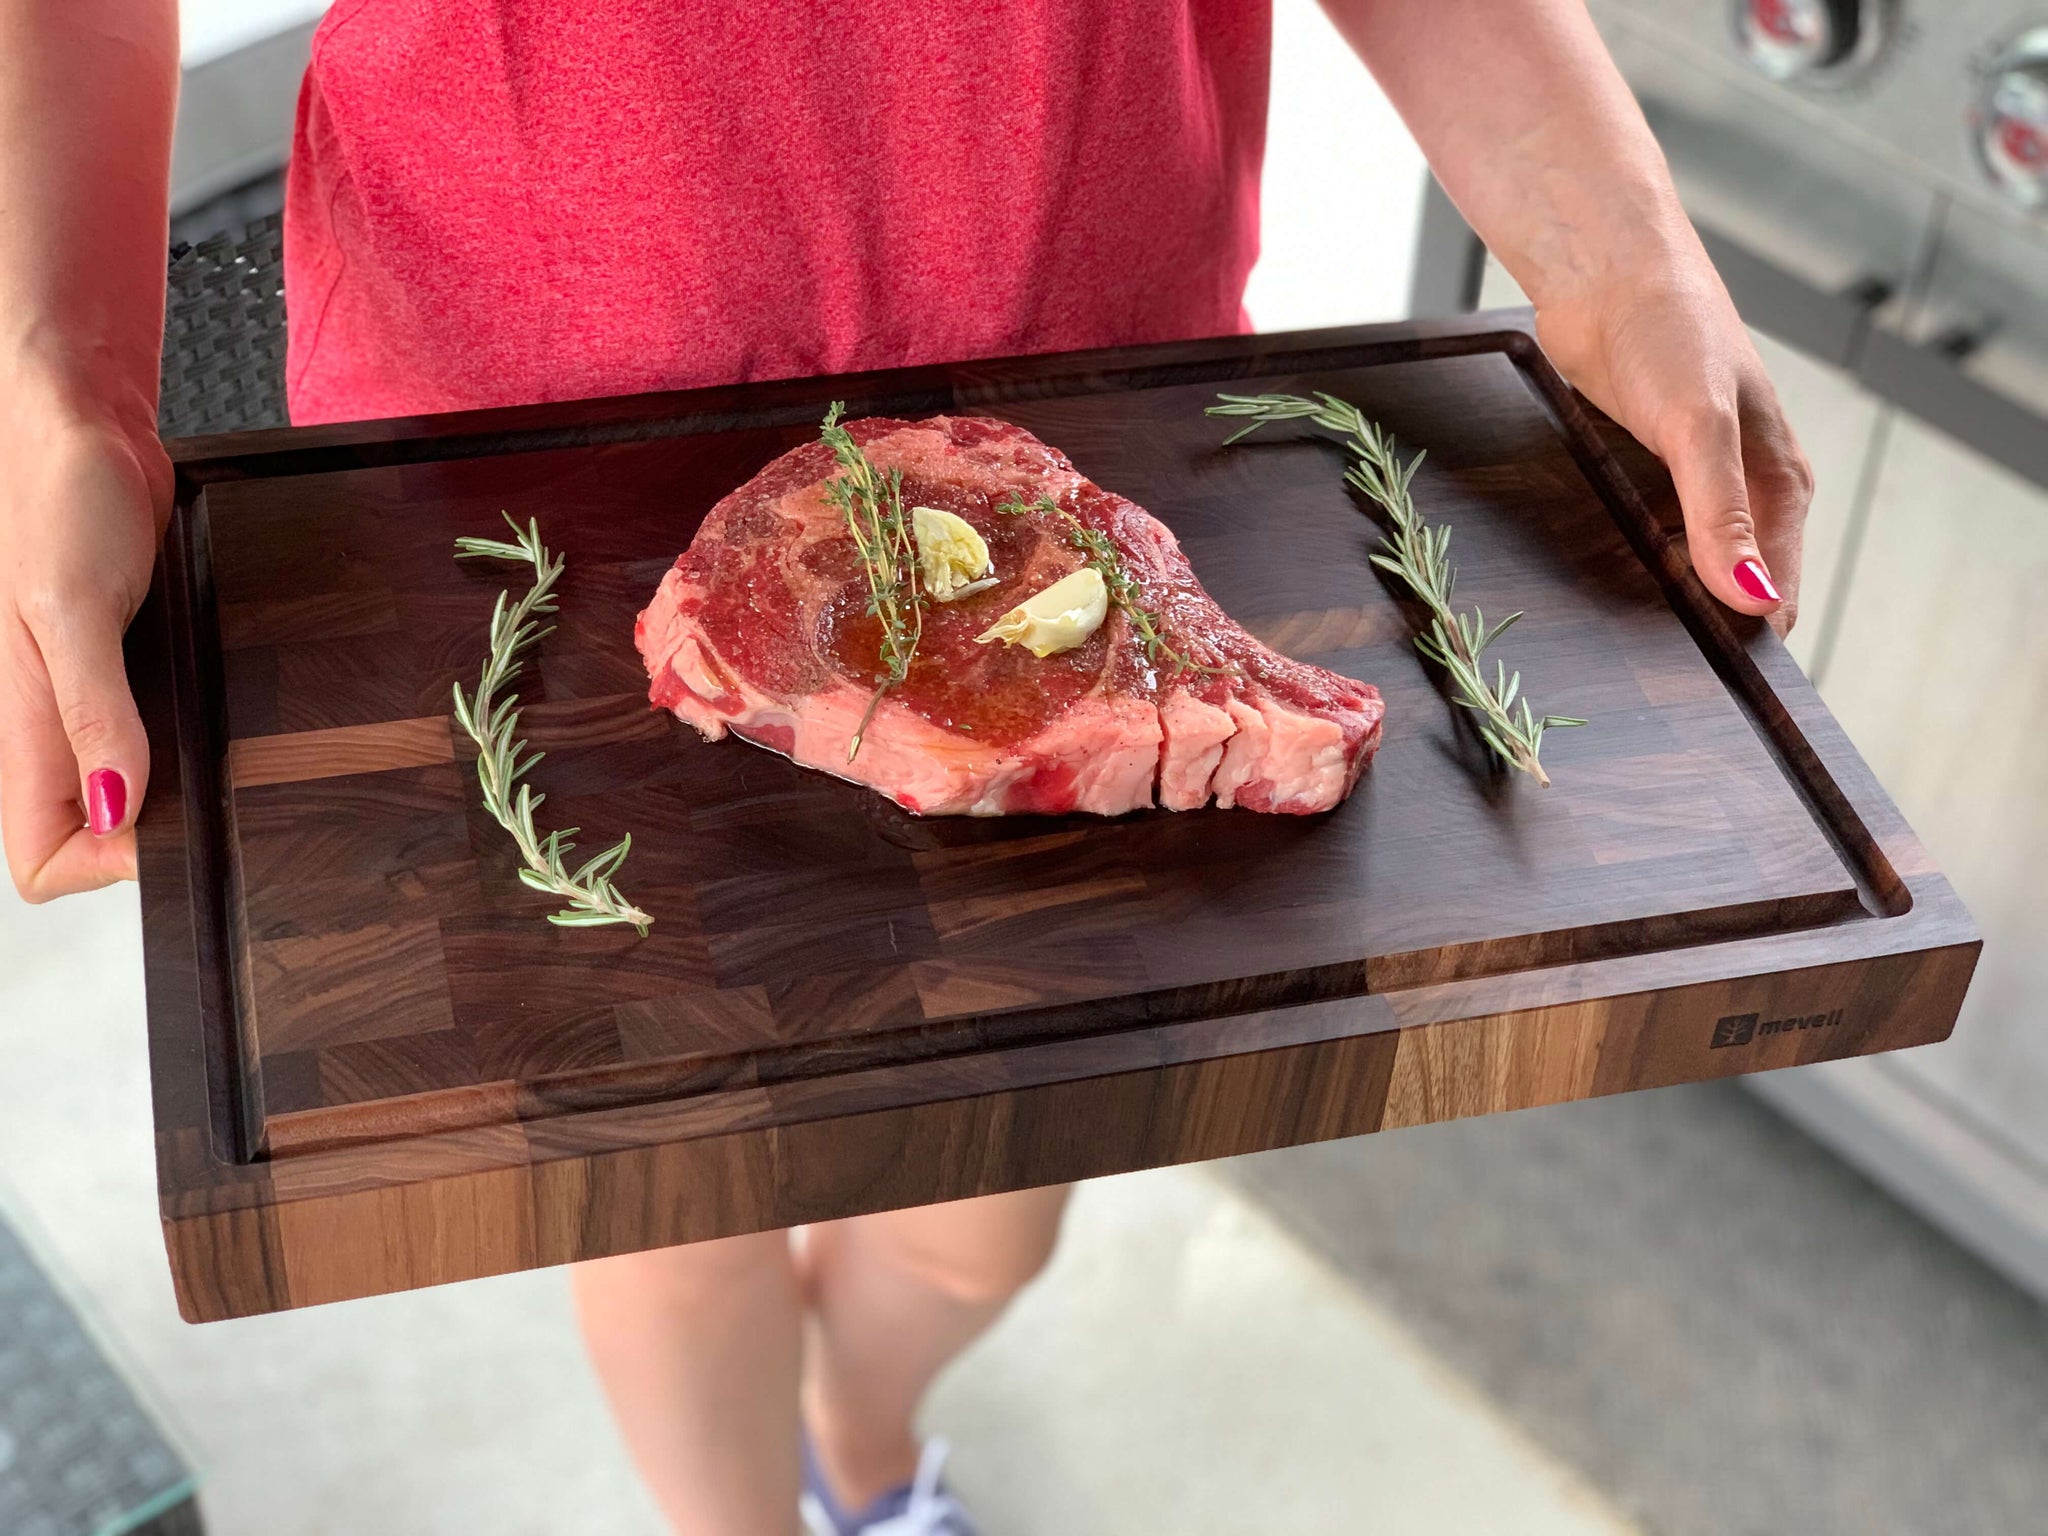 Is It Safe To Cut Raw Meat On A Wood Cutting Board?